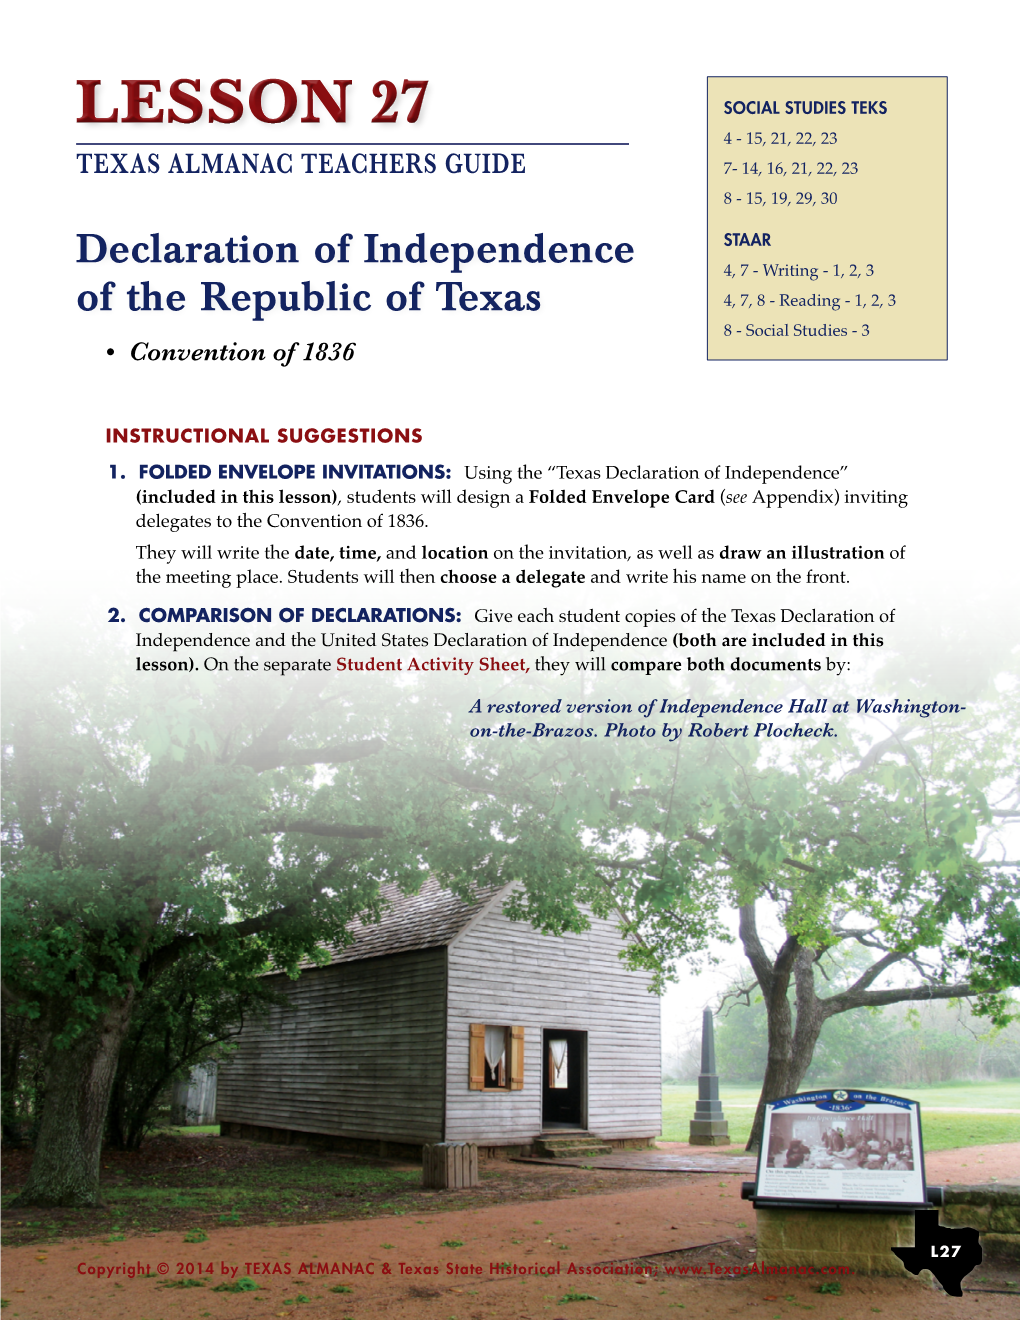 Texas Declaration of Independence” (Included in This Lesson), Students Will Design a Folded Envelope Card (See Appendix) Inviting Delegates to the Convention of 1836